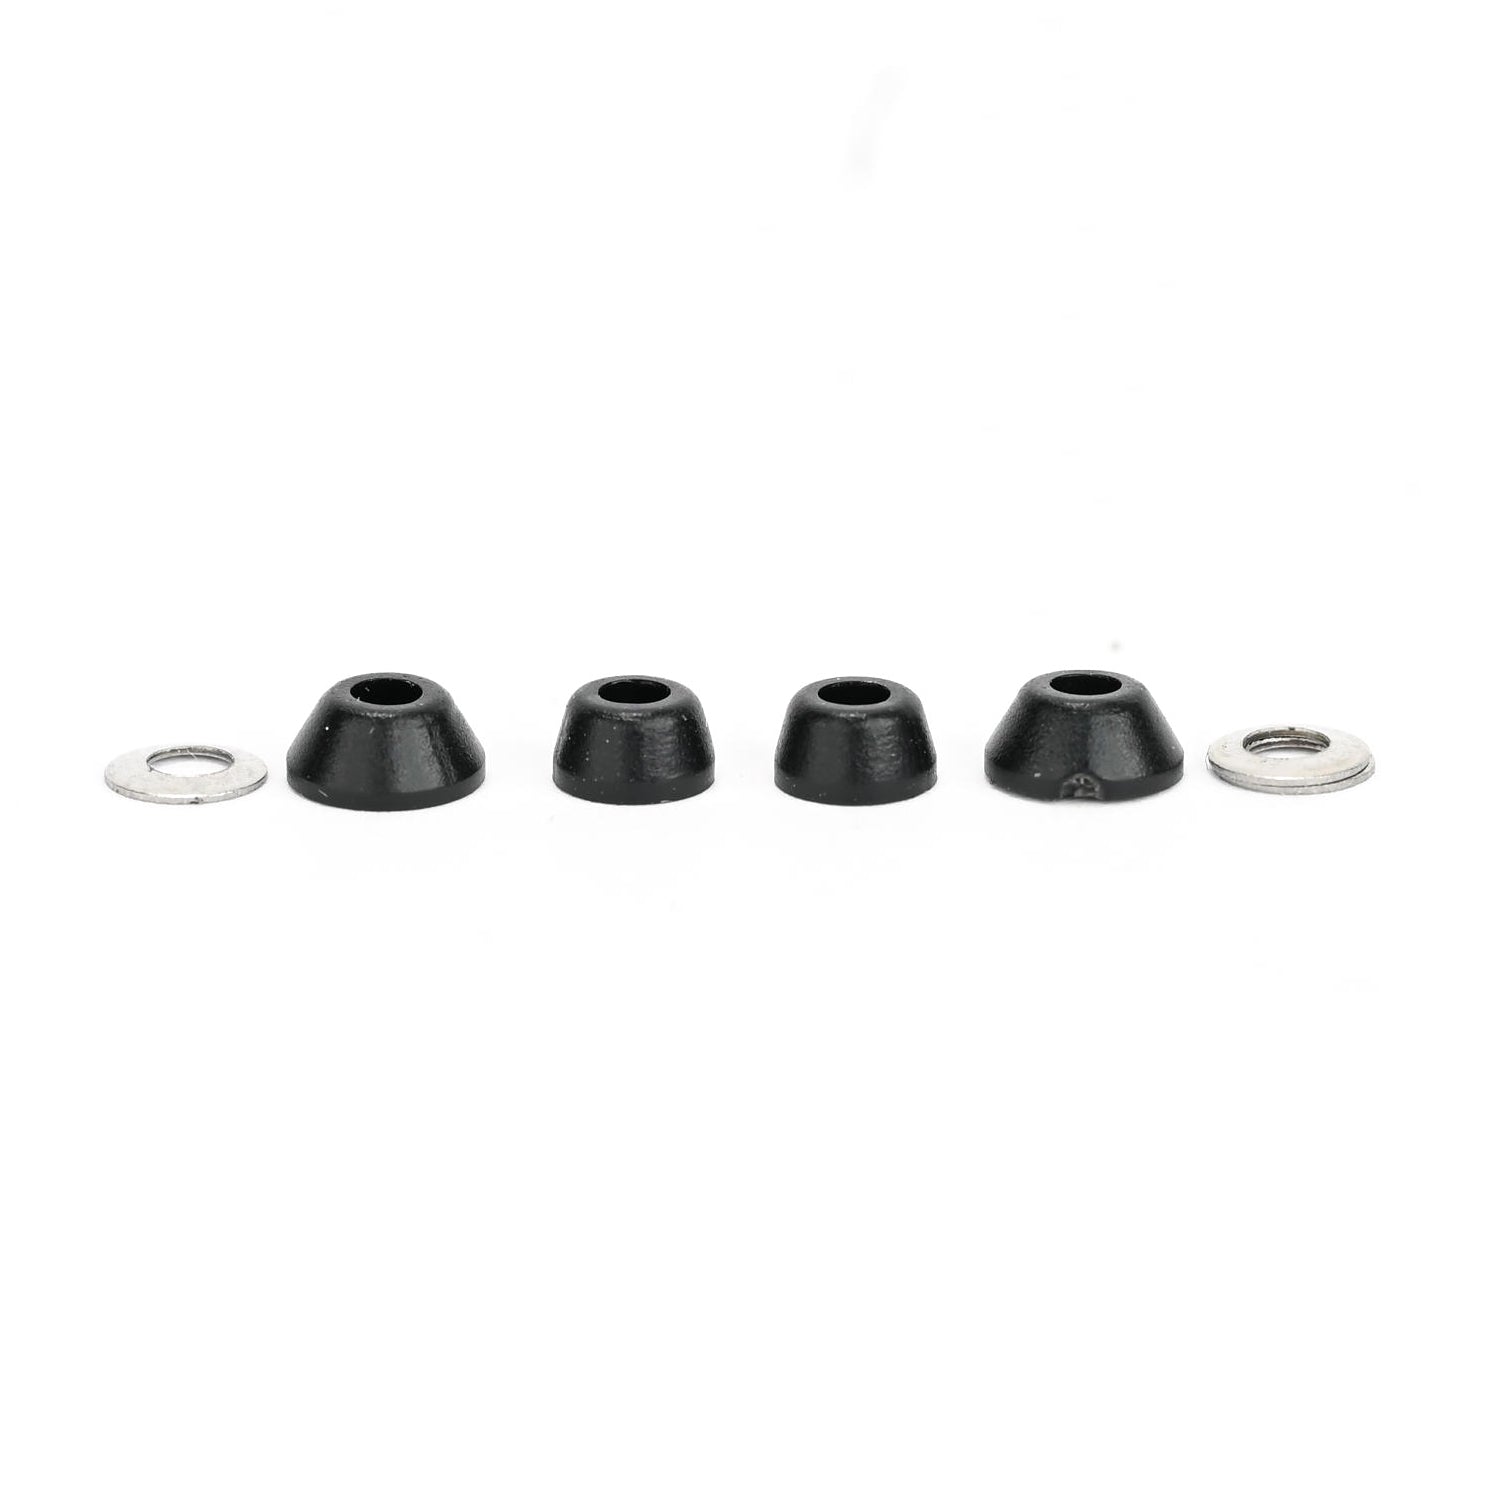 Medium Black Blackriver First Aid Fingerboard Bushings without pivot cups